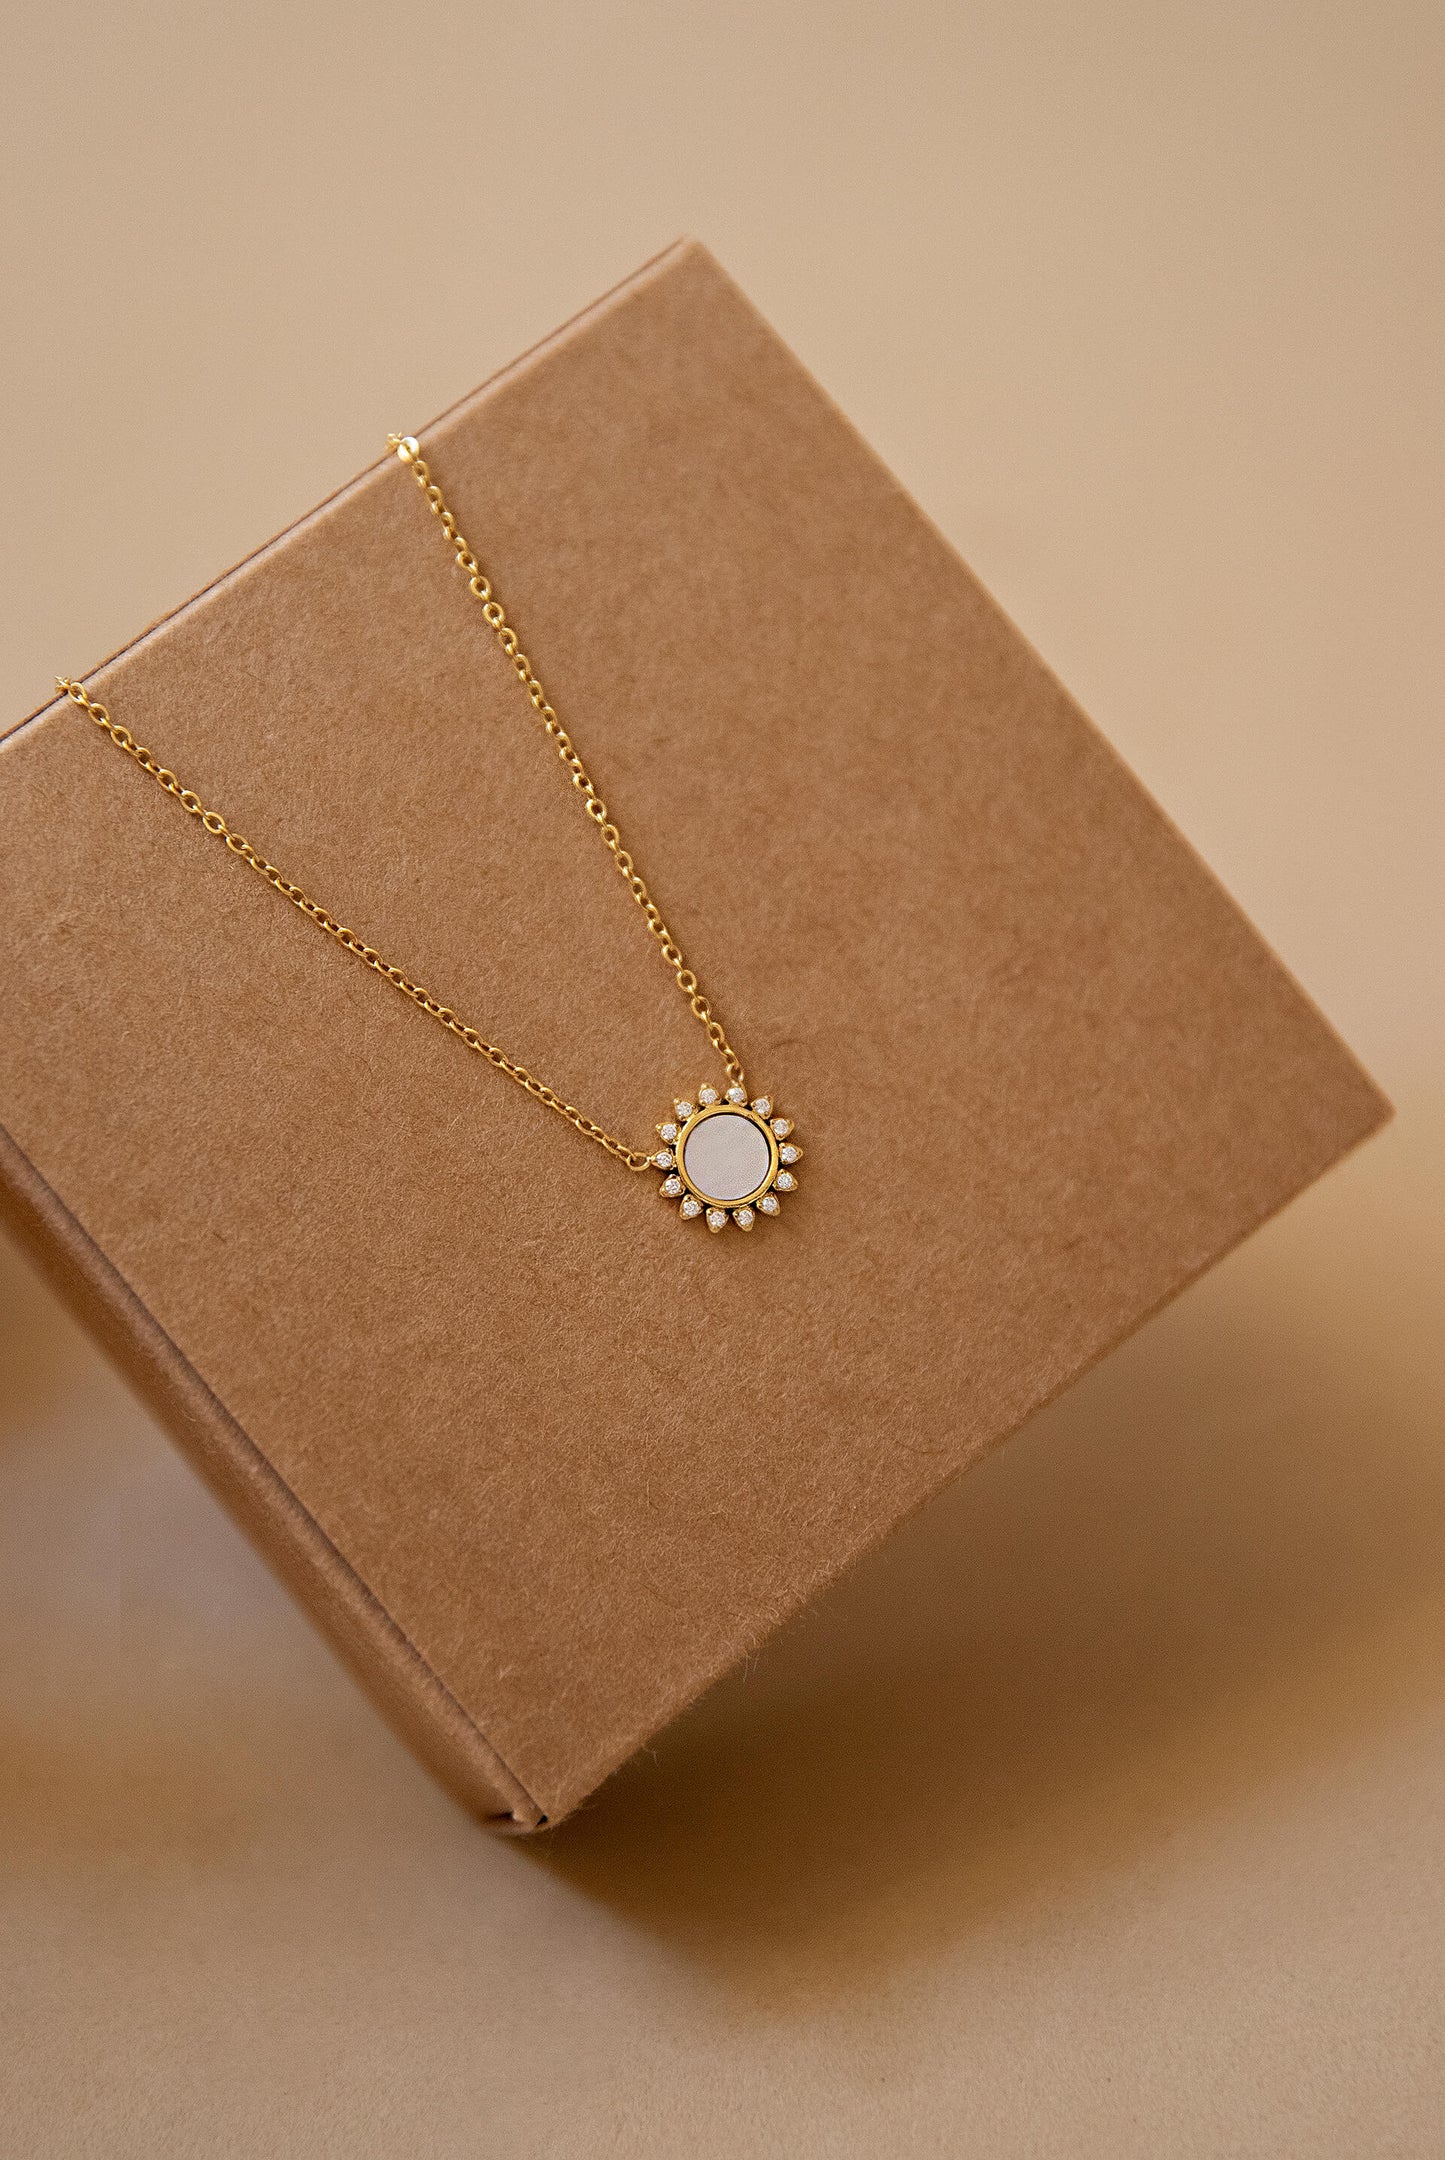 Sunny Necklace (Gold - White)